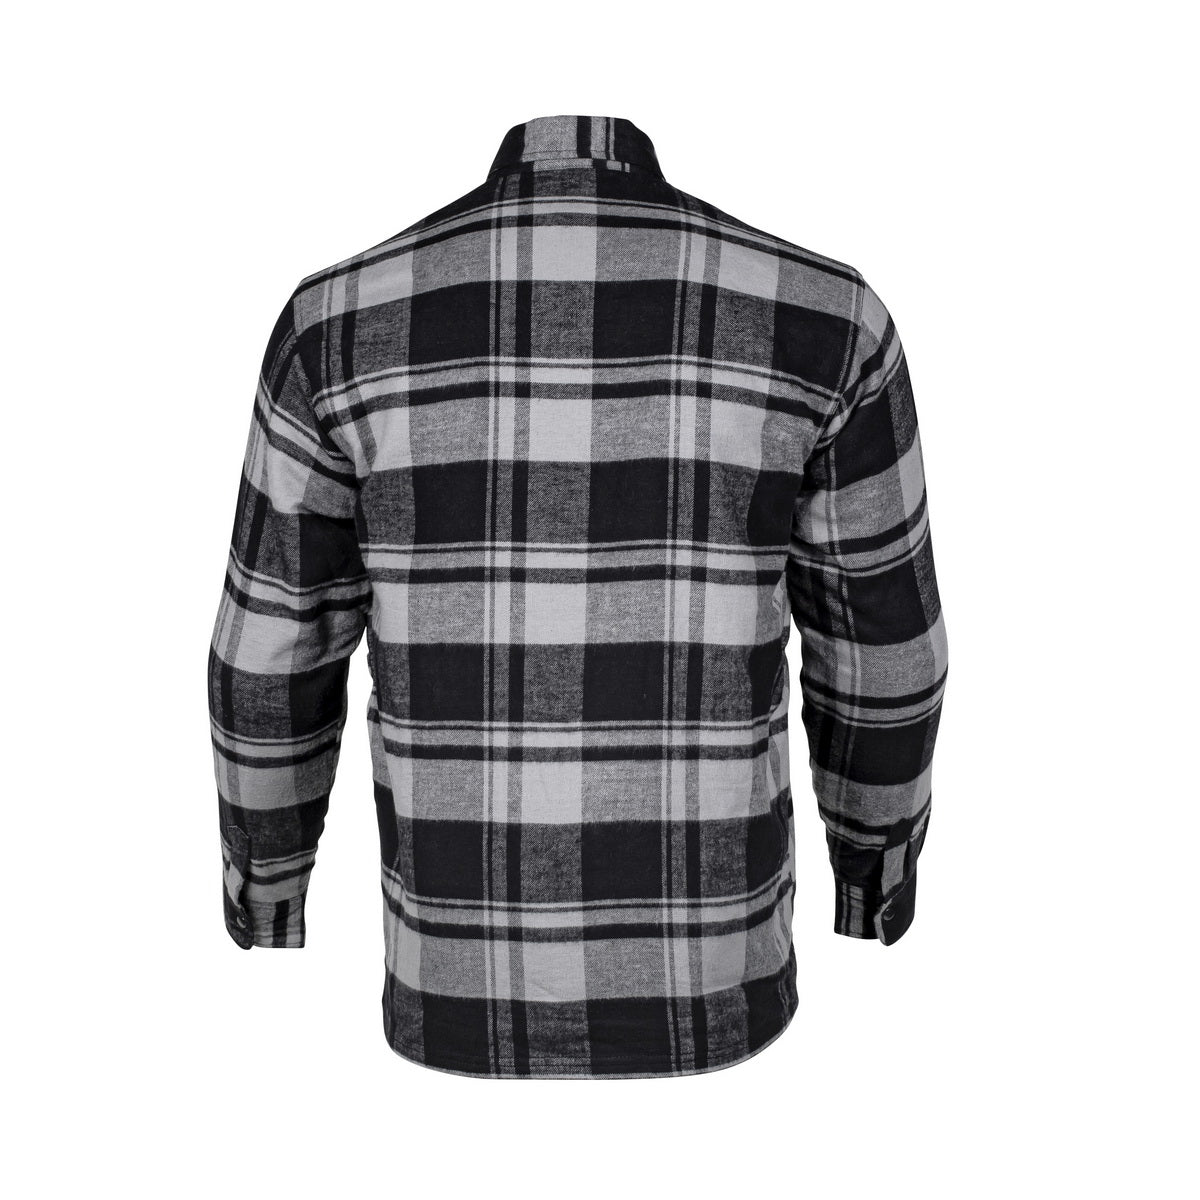 Cortech ‘The Bender’ Mens Storm Grey Premium Motorcycle Riding Flannel Shirt with Armor